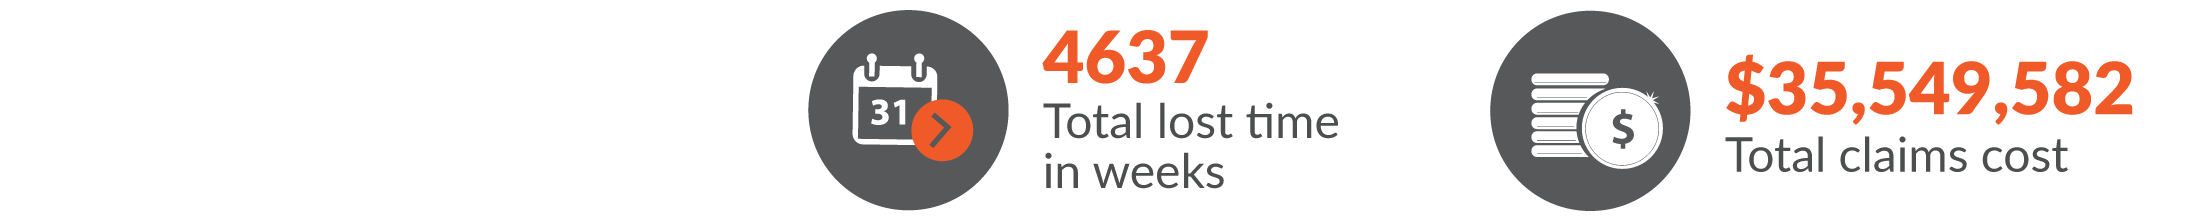 This infographic shows the total workers compensation claims resulted in 4637 total lost time in weeks and $35,549,582 was paid in benefits.